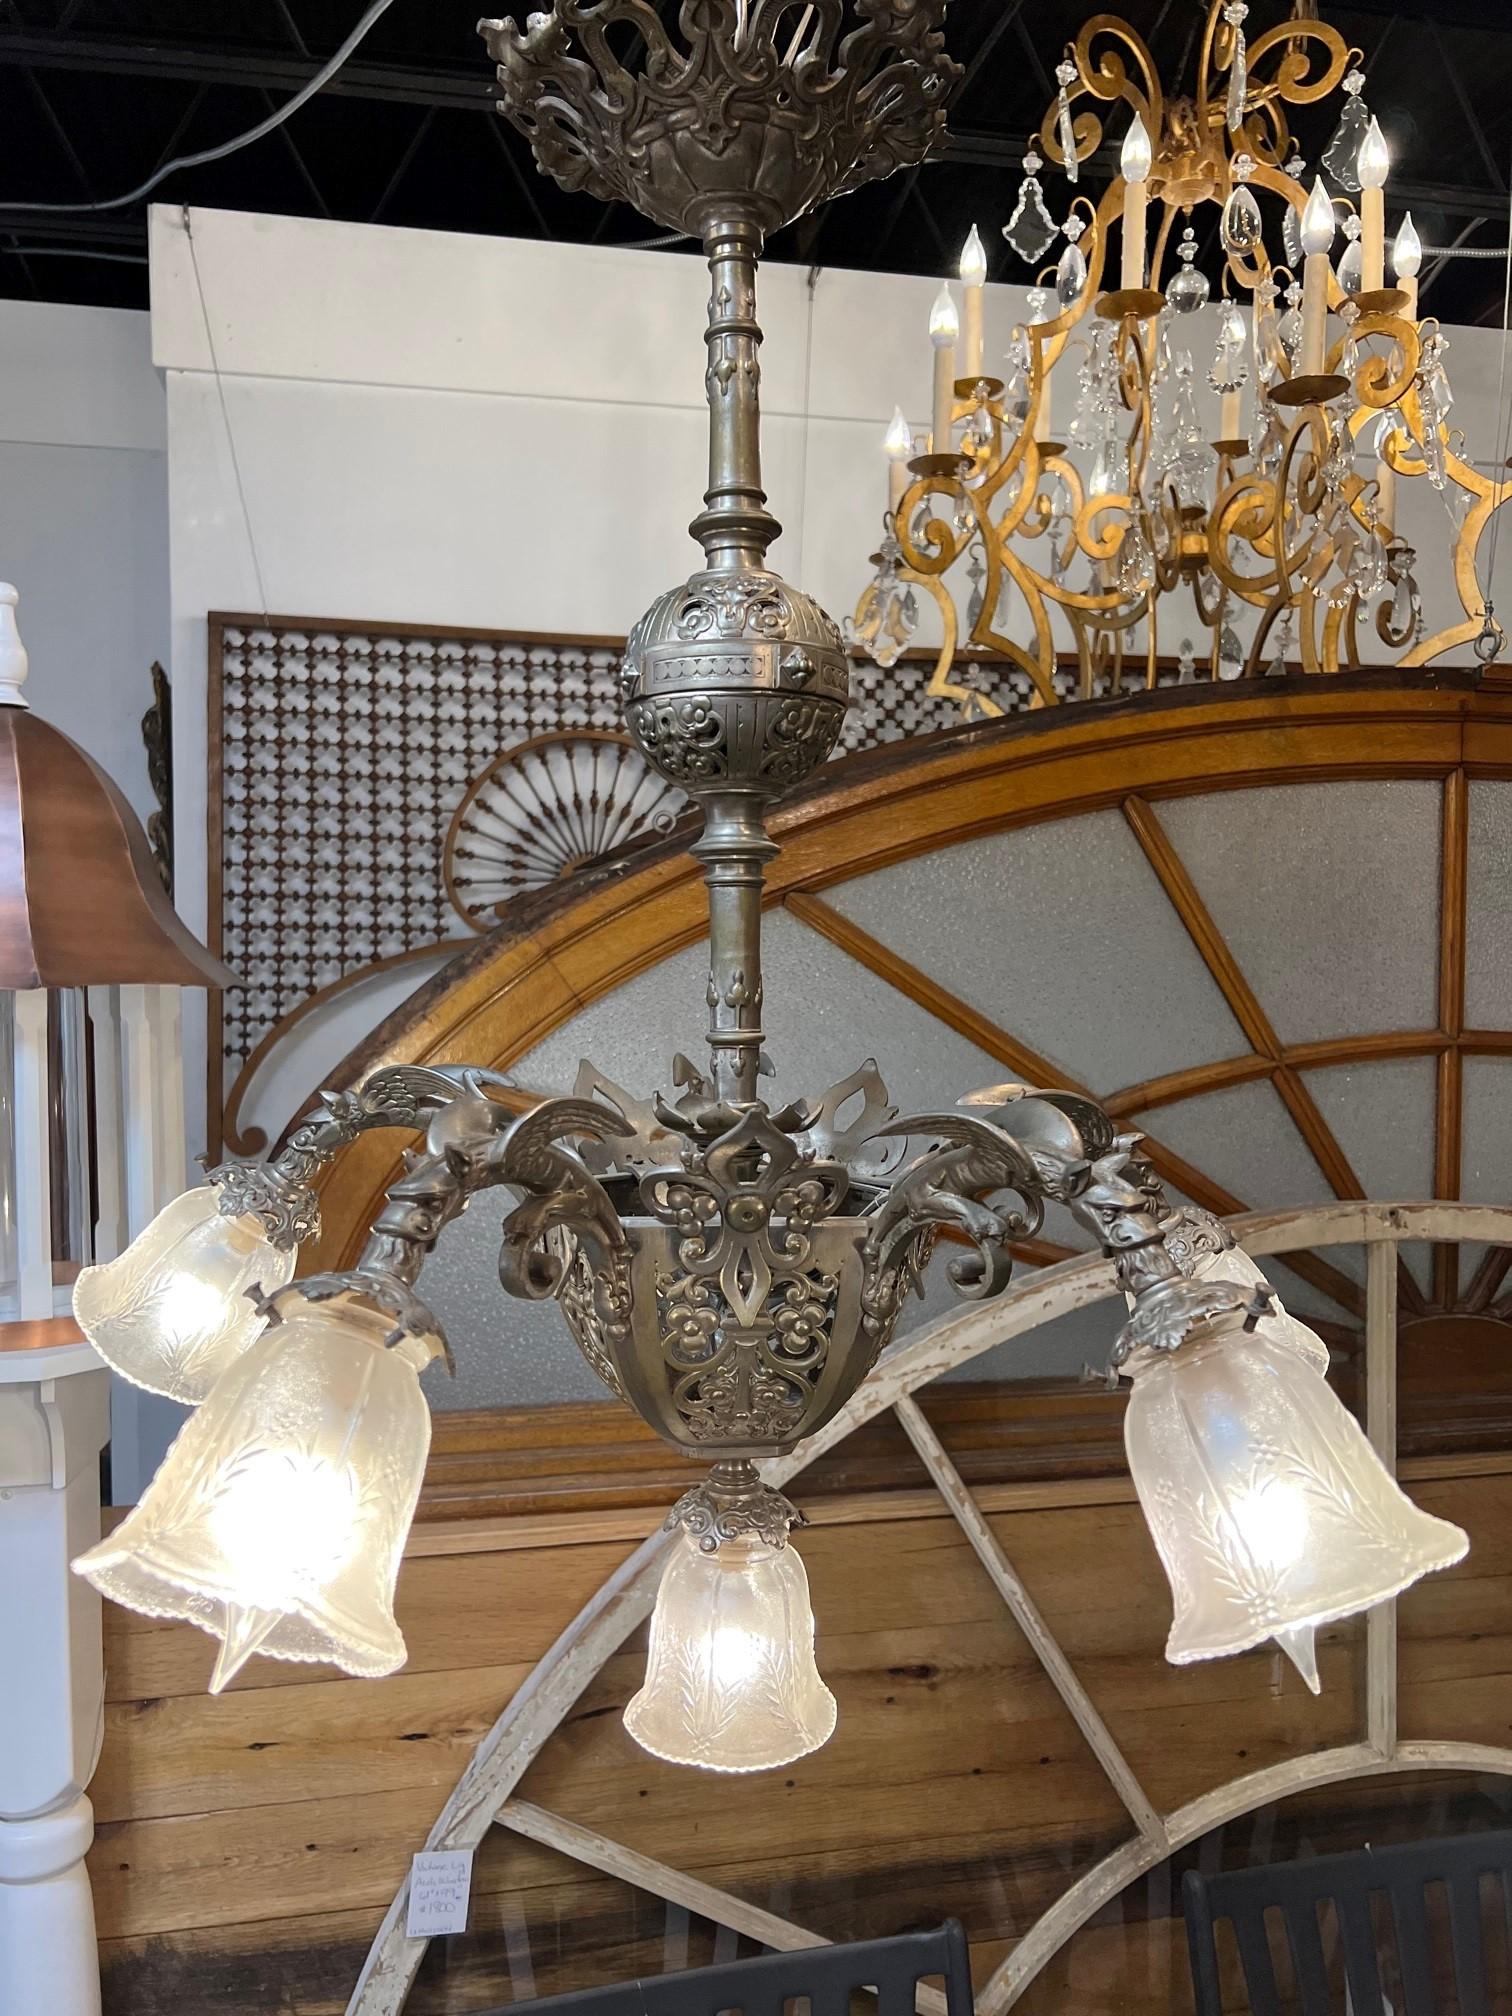 Beautiful antique brush nickel brass chandelier with five griffin arms and a center light. Its a very decorative chandelier with intricate detailing with five unique griffin lights. I believe its from the Early to Mid-20th century and was